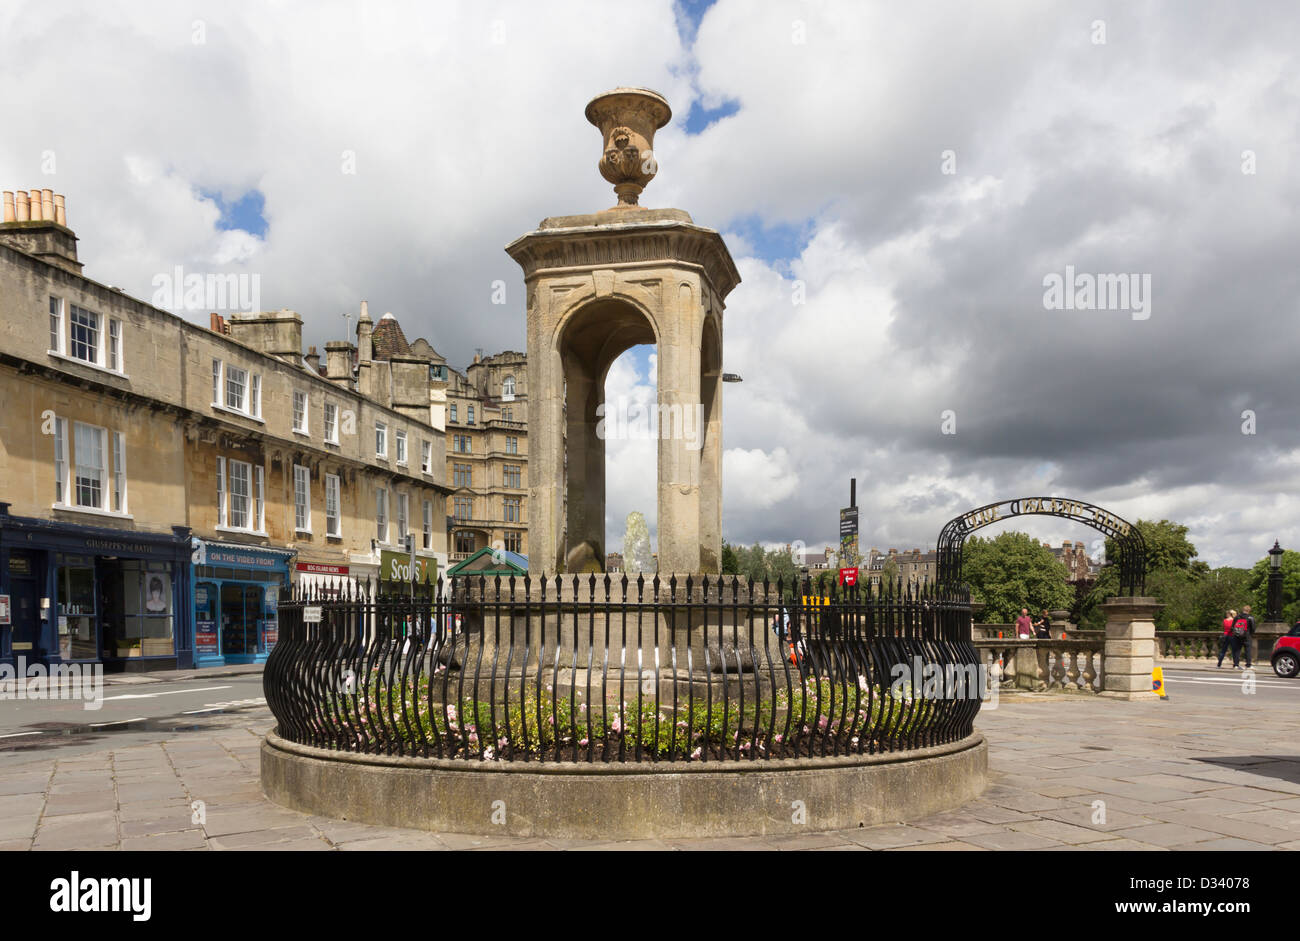 Mineral water fountain by Italian sculptor Stefano Valerio Pieroni sited on Terrace Walk in Bath. Stock Photo